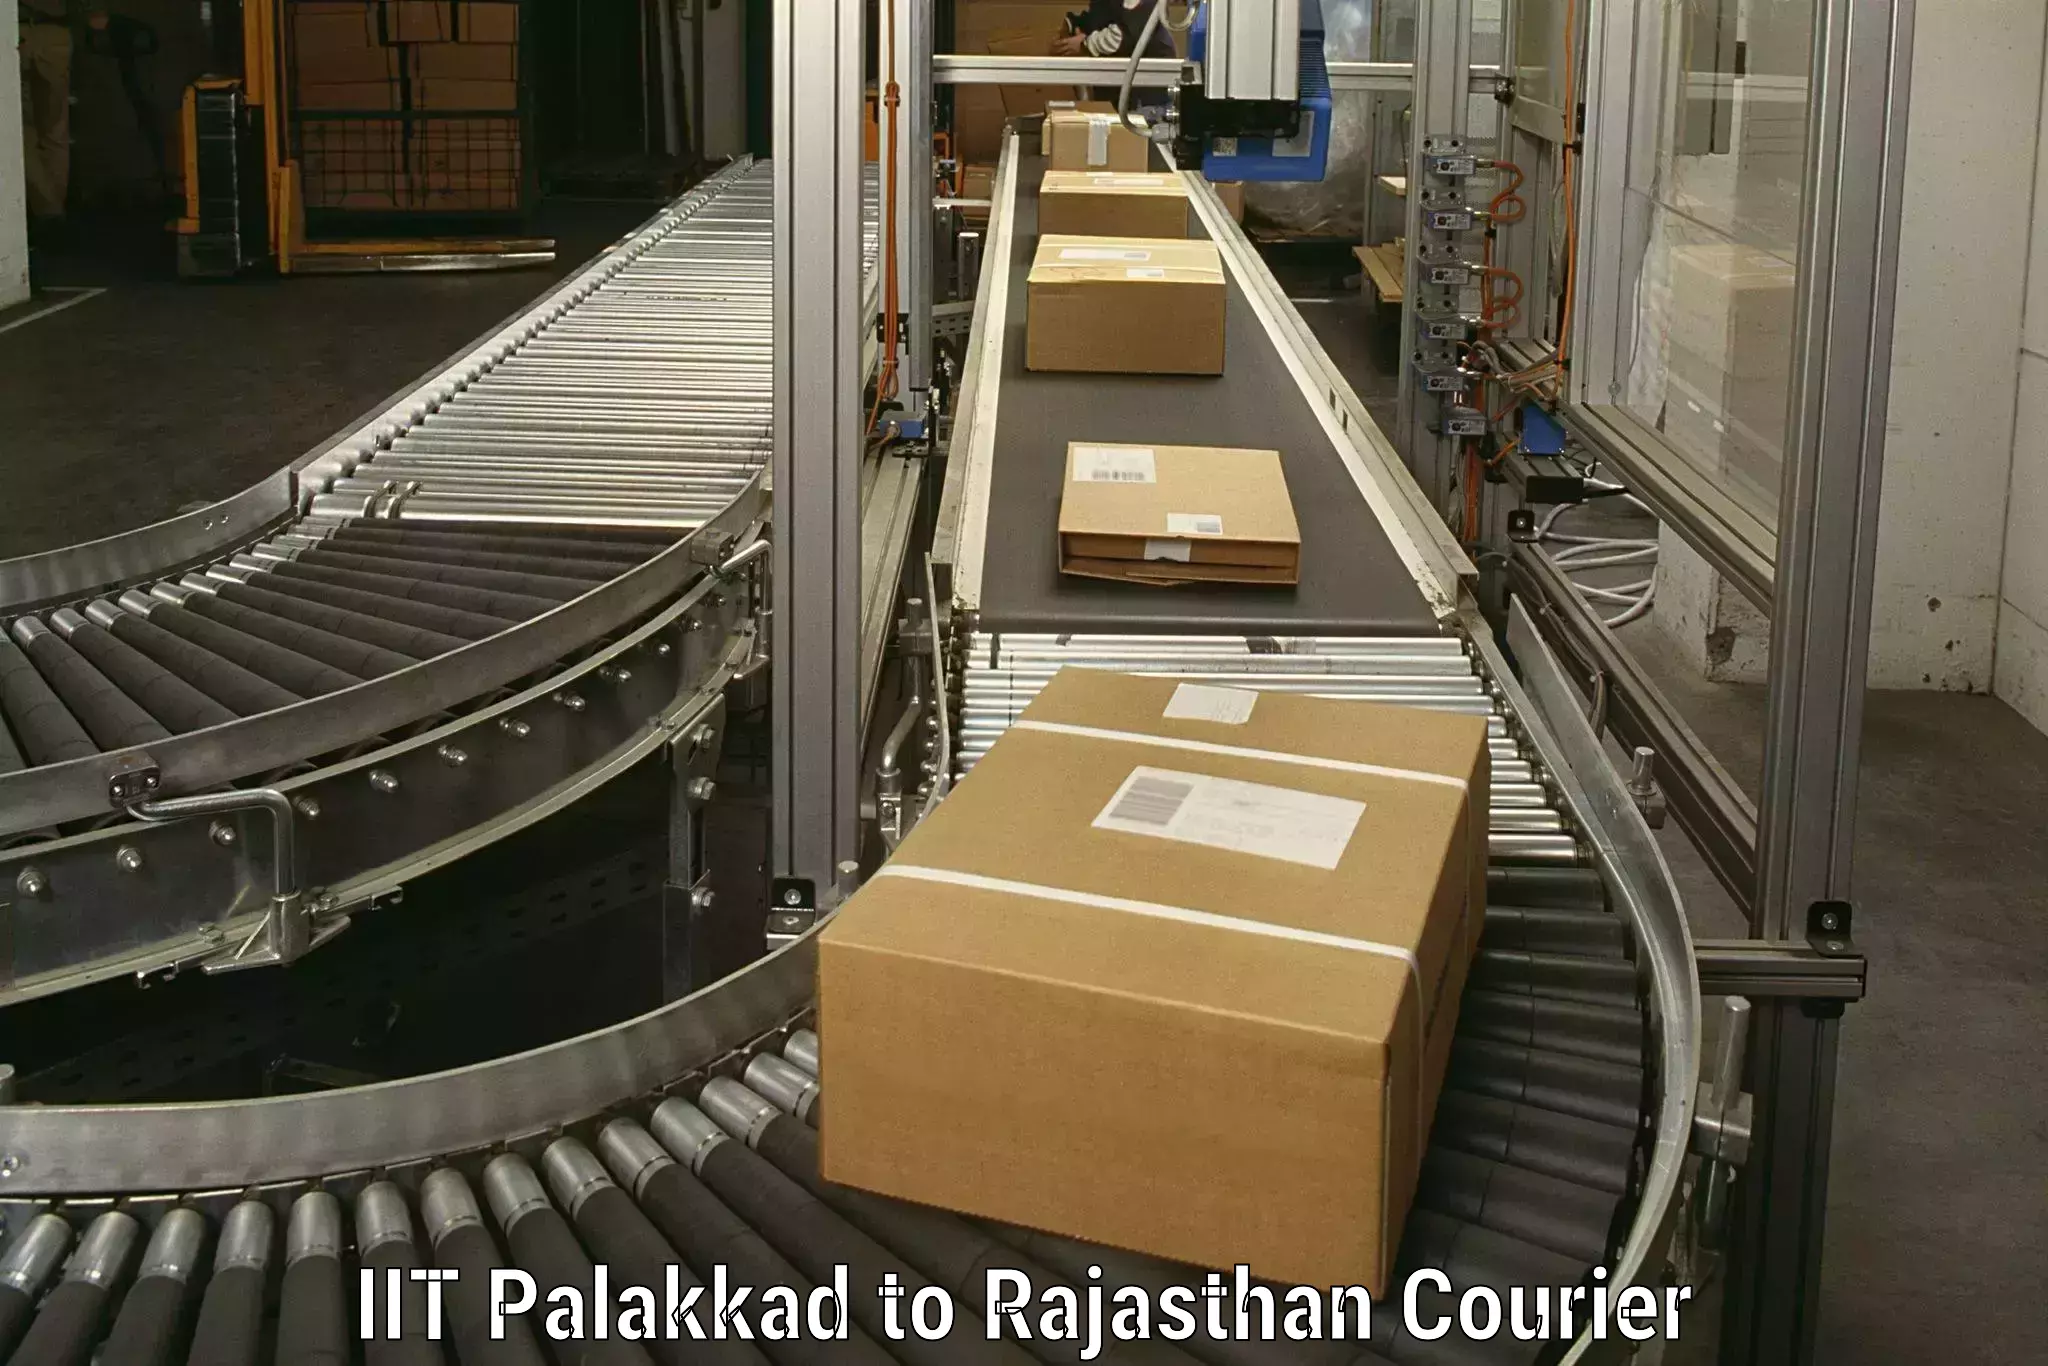 Furniture delivery service IIT Palakkad to Rajasthan